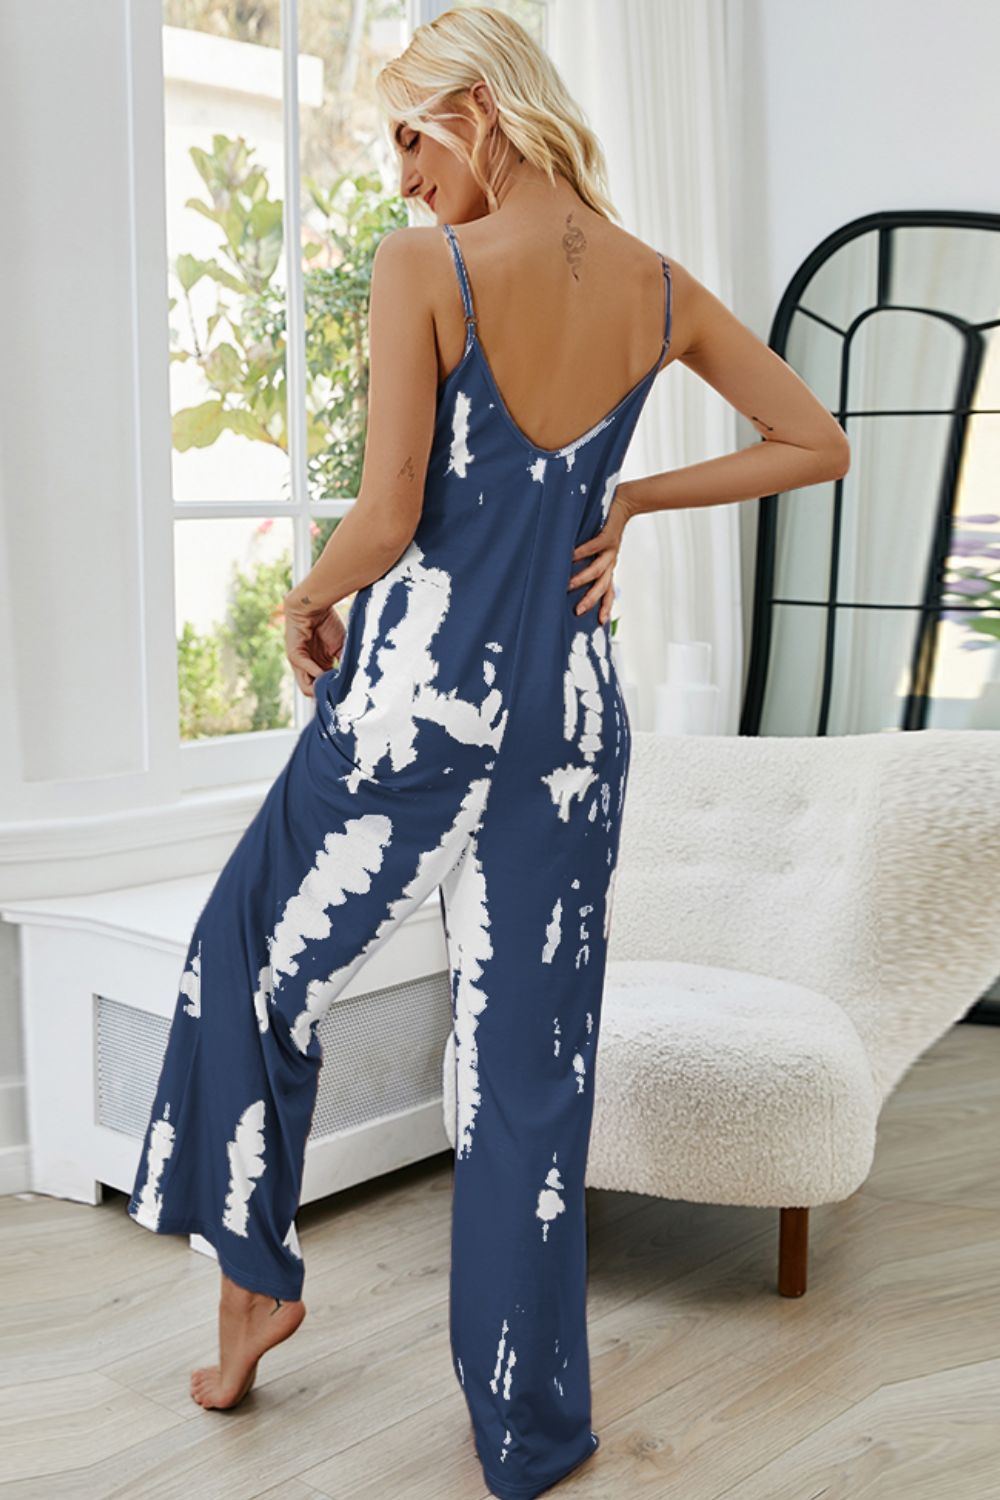 Embrace boho-chic style with our Tie-Dye Jumpsuit, featuring pockets and adjustable straps. Perfect for any casual outing. Available in 9 colors.